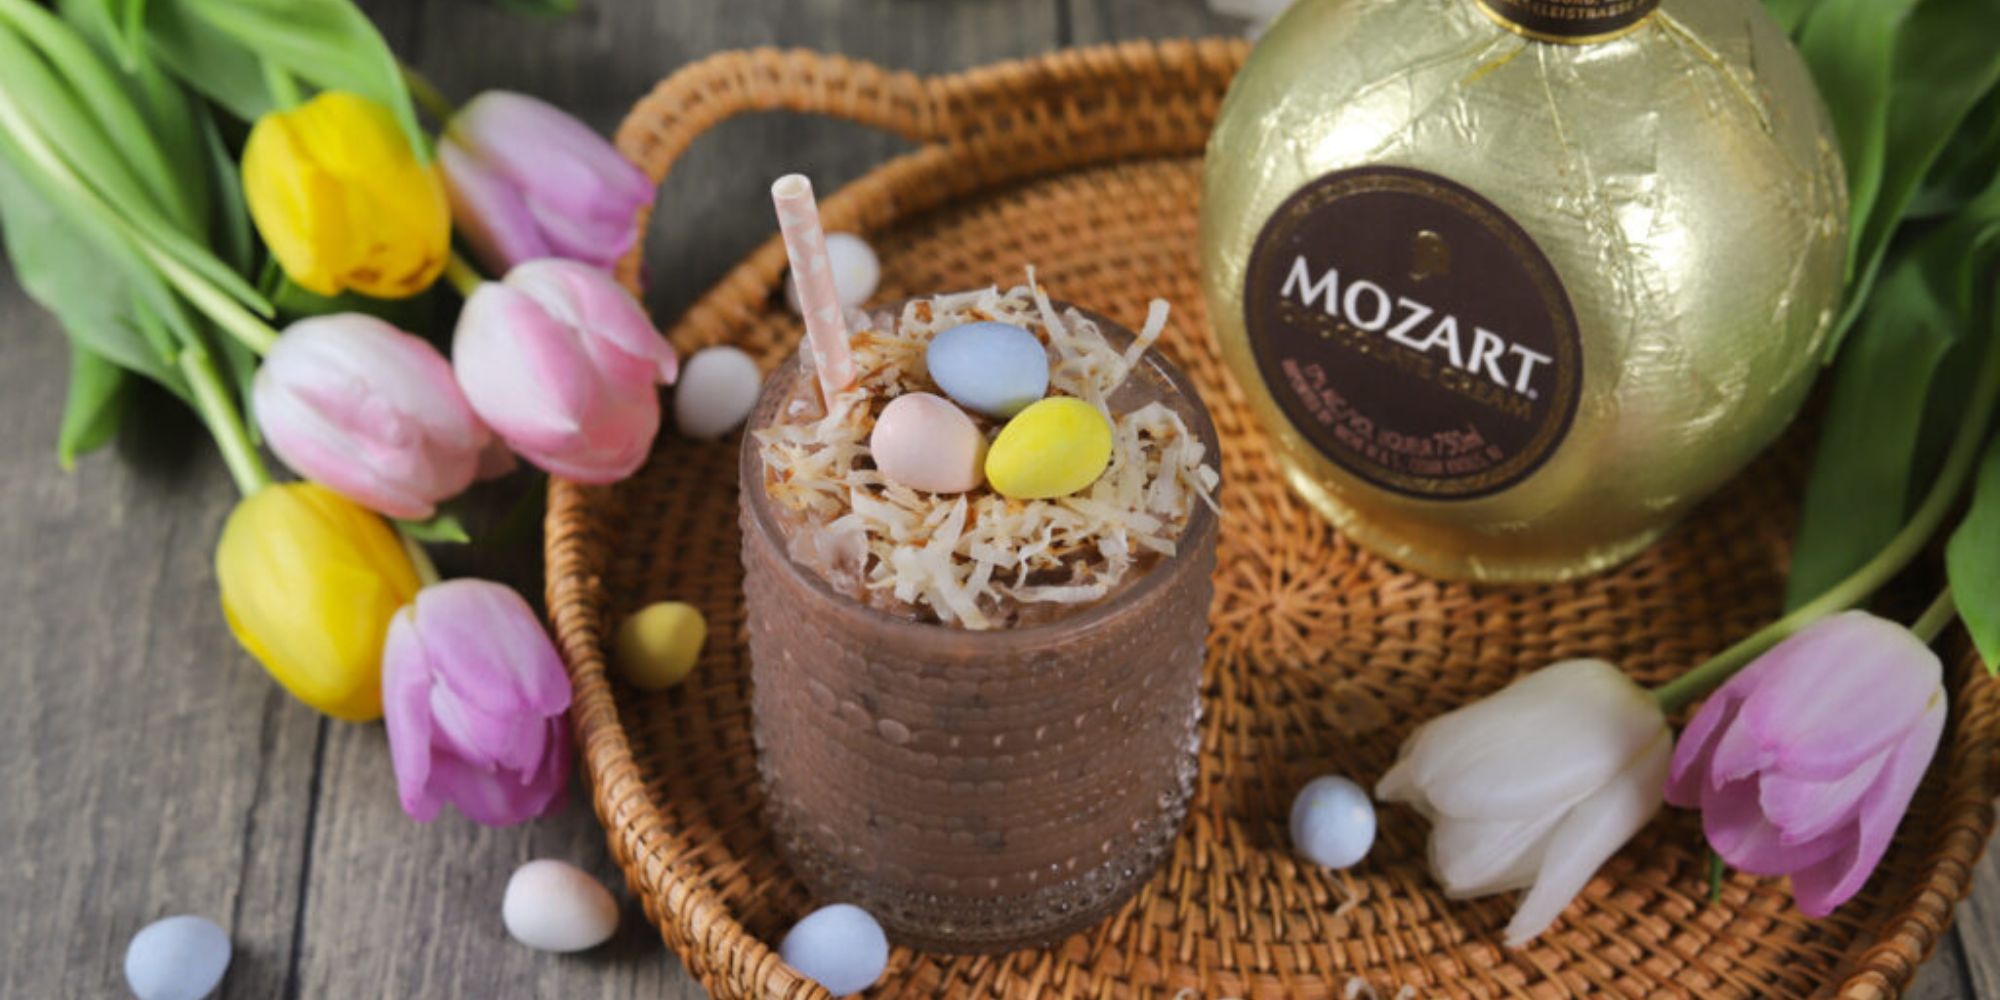 how-to-drink-mozart-chocolate-liqueur